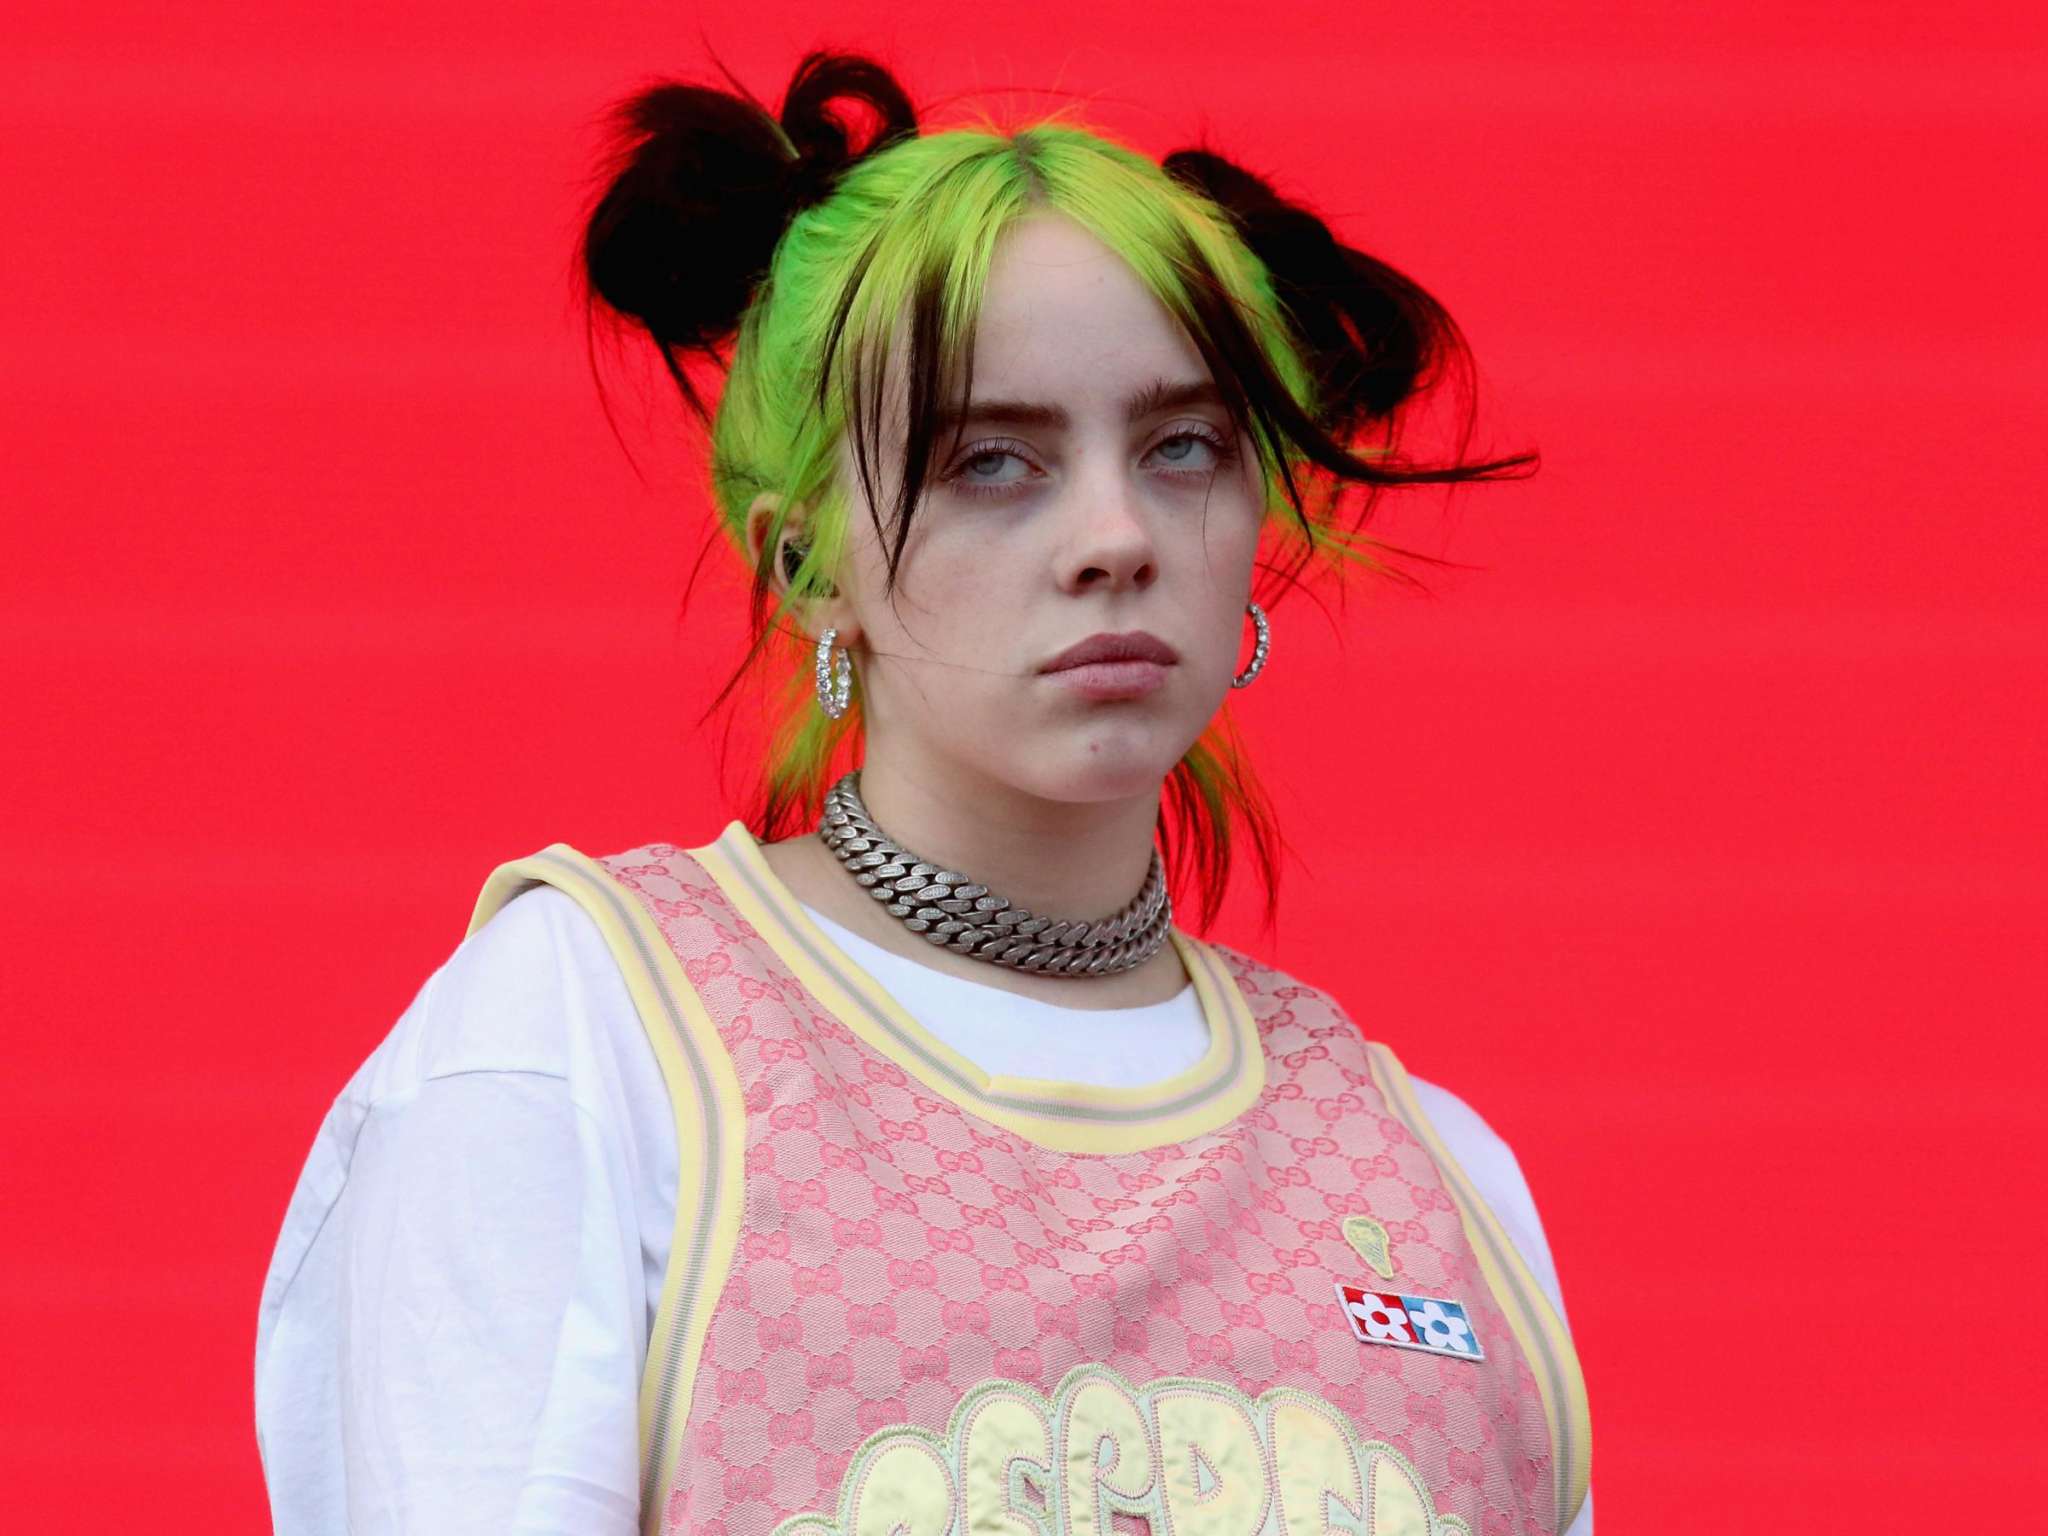 ”billie-eilish-makes-fun-of-the-nypd-for-complaining-that-theyre-being-shamed-by-blm-protesters-everywhere-after-the-killing-of-george-floyd-goo-goo-ga-ga”